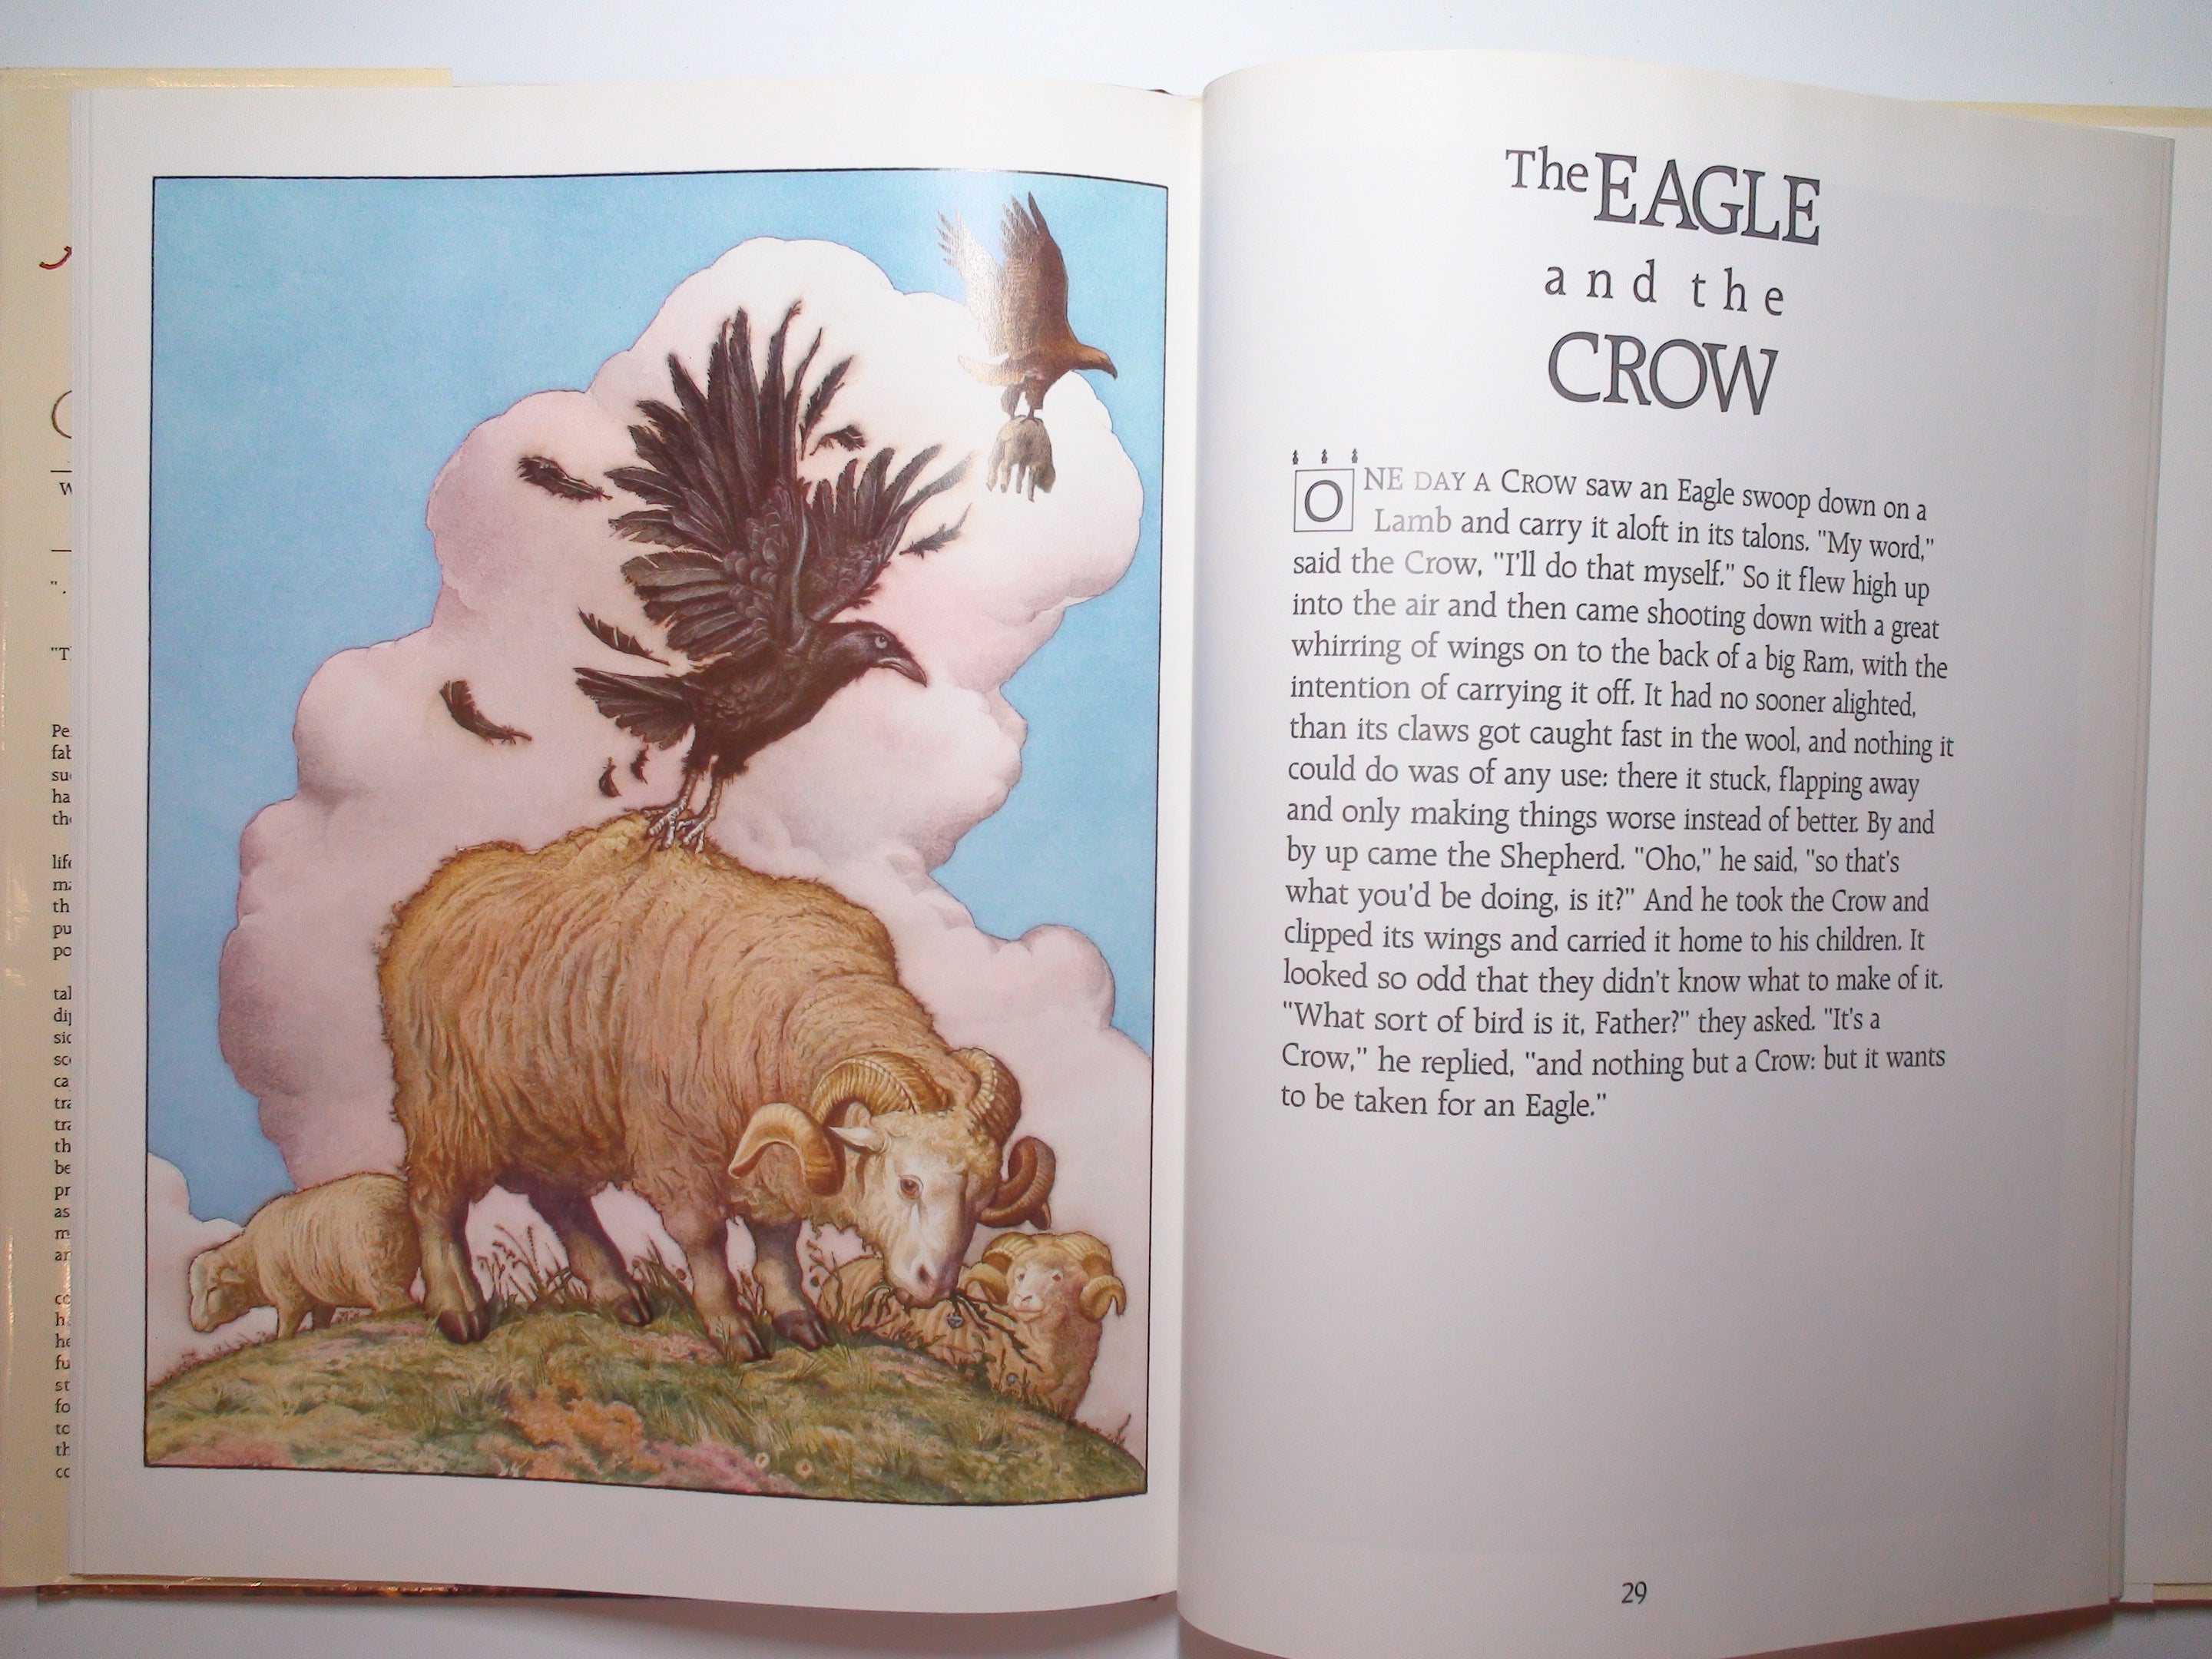 Aesop's Fables, Illustrated by Charles Santore, Jelly Bean Press, 1988